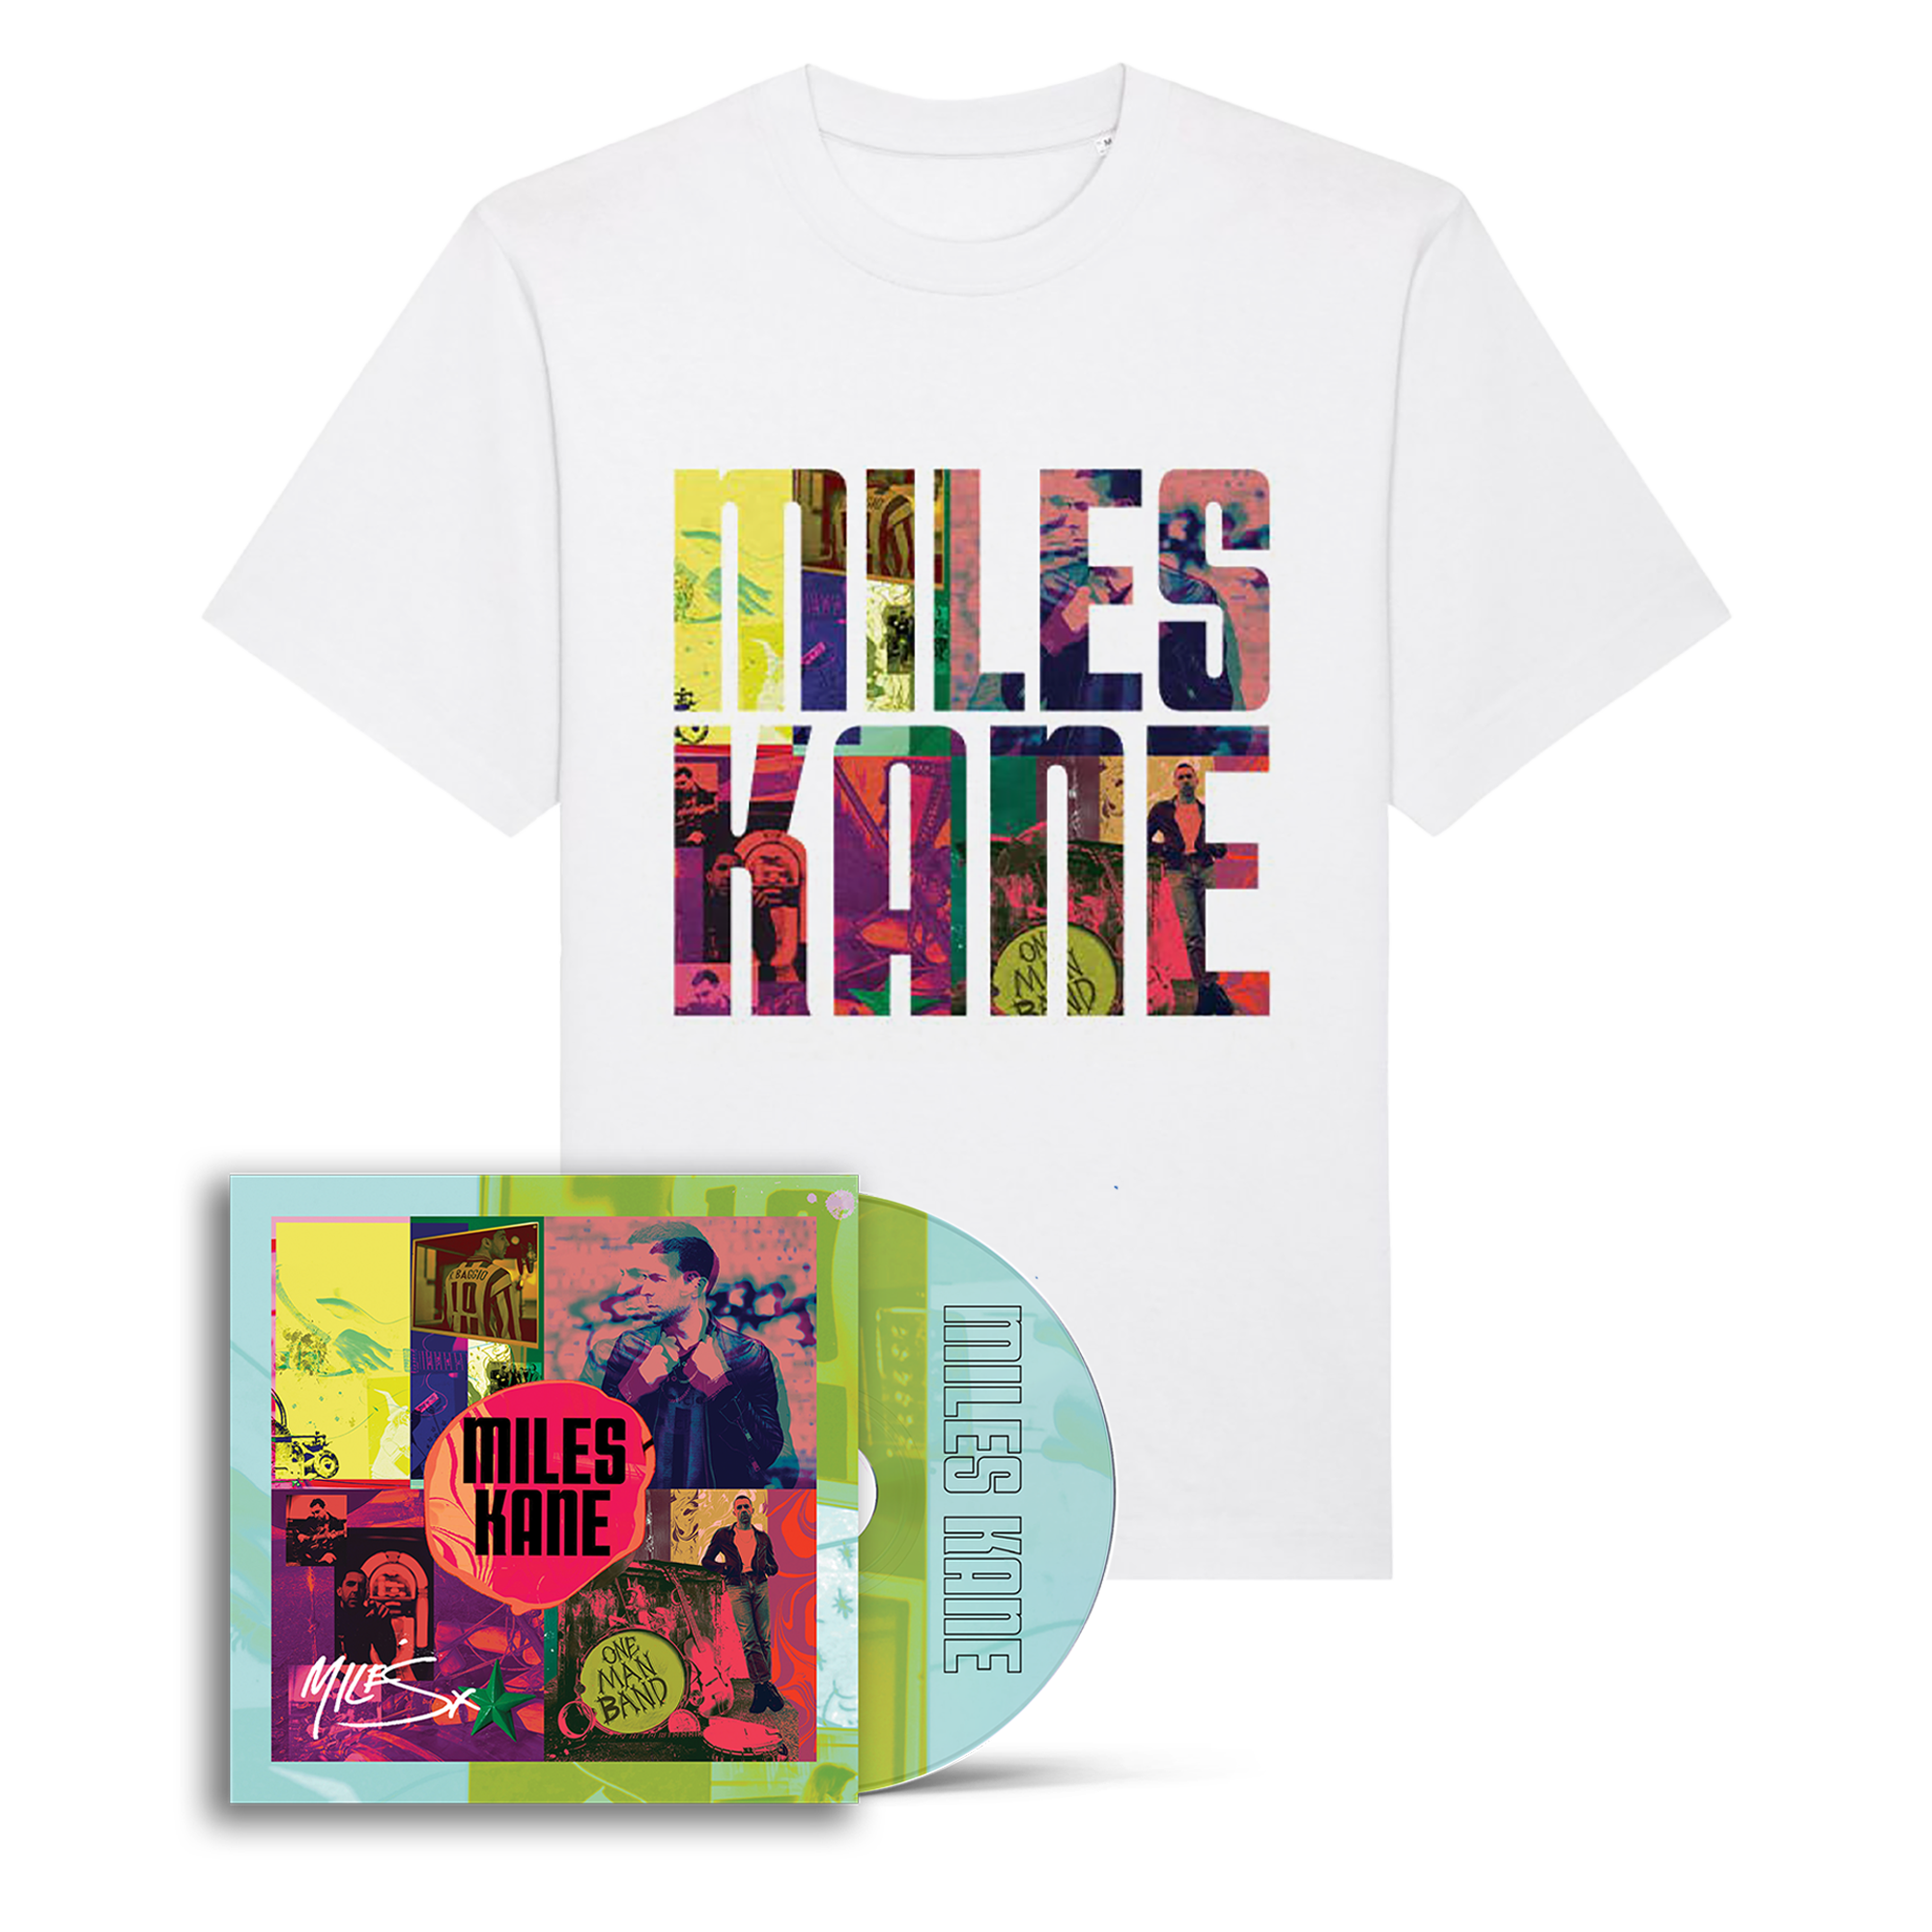 One Man Band: Alt Art Signed CD + White Infill Text Tee